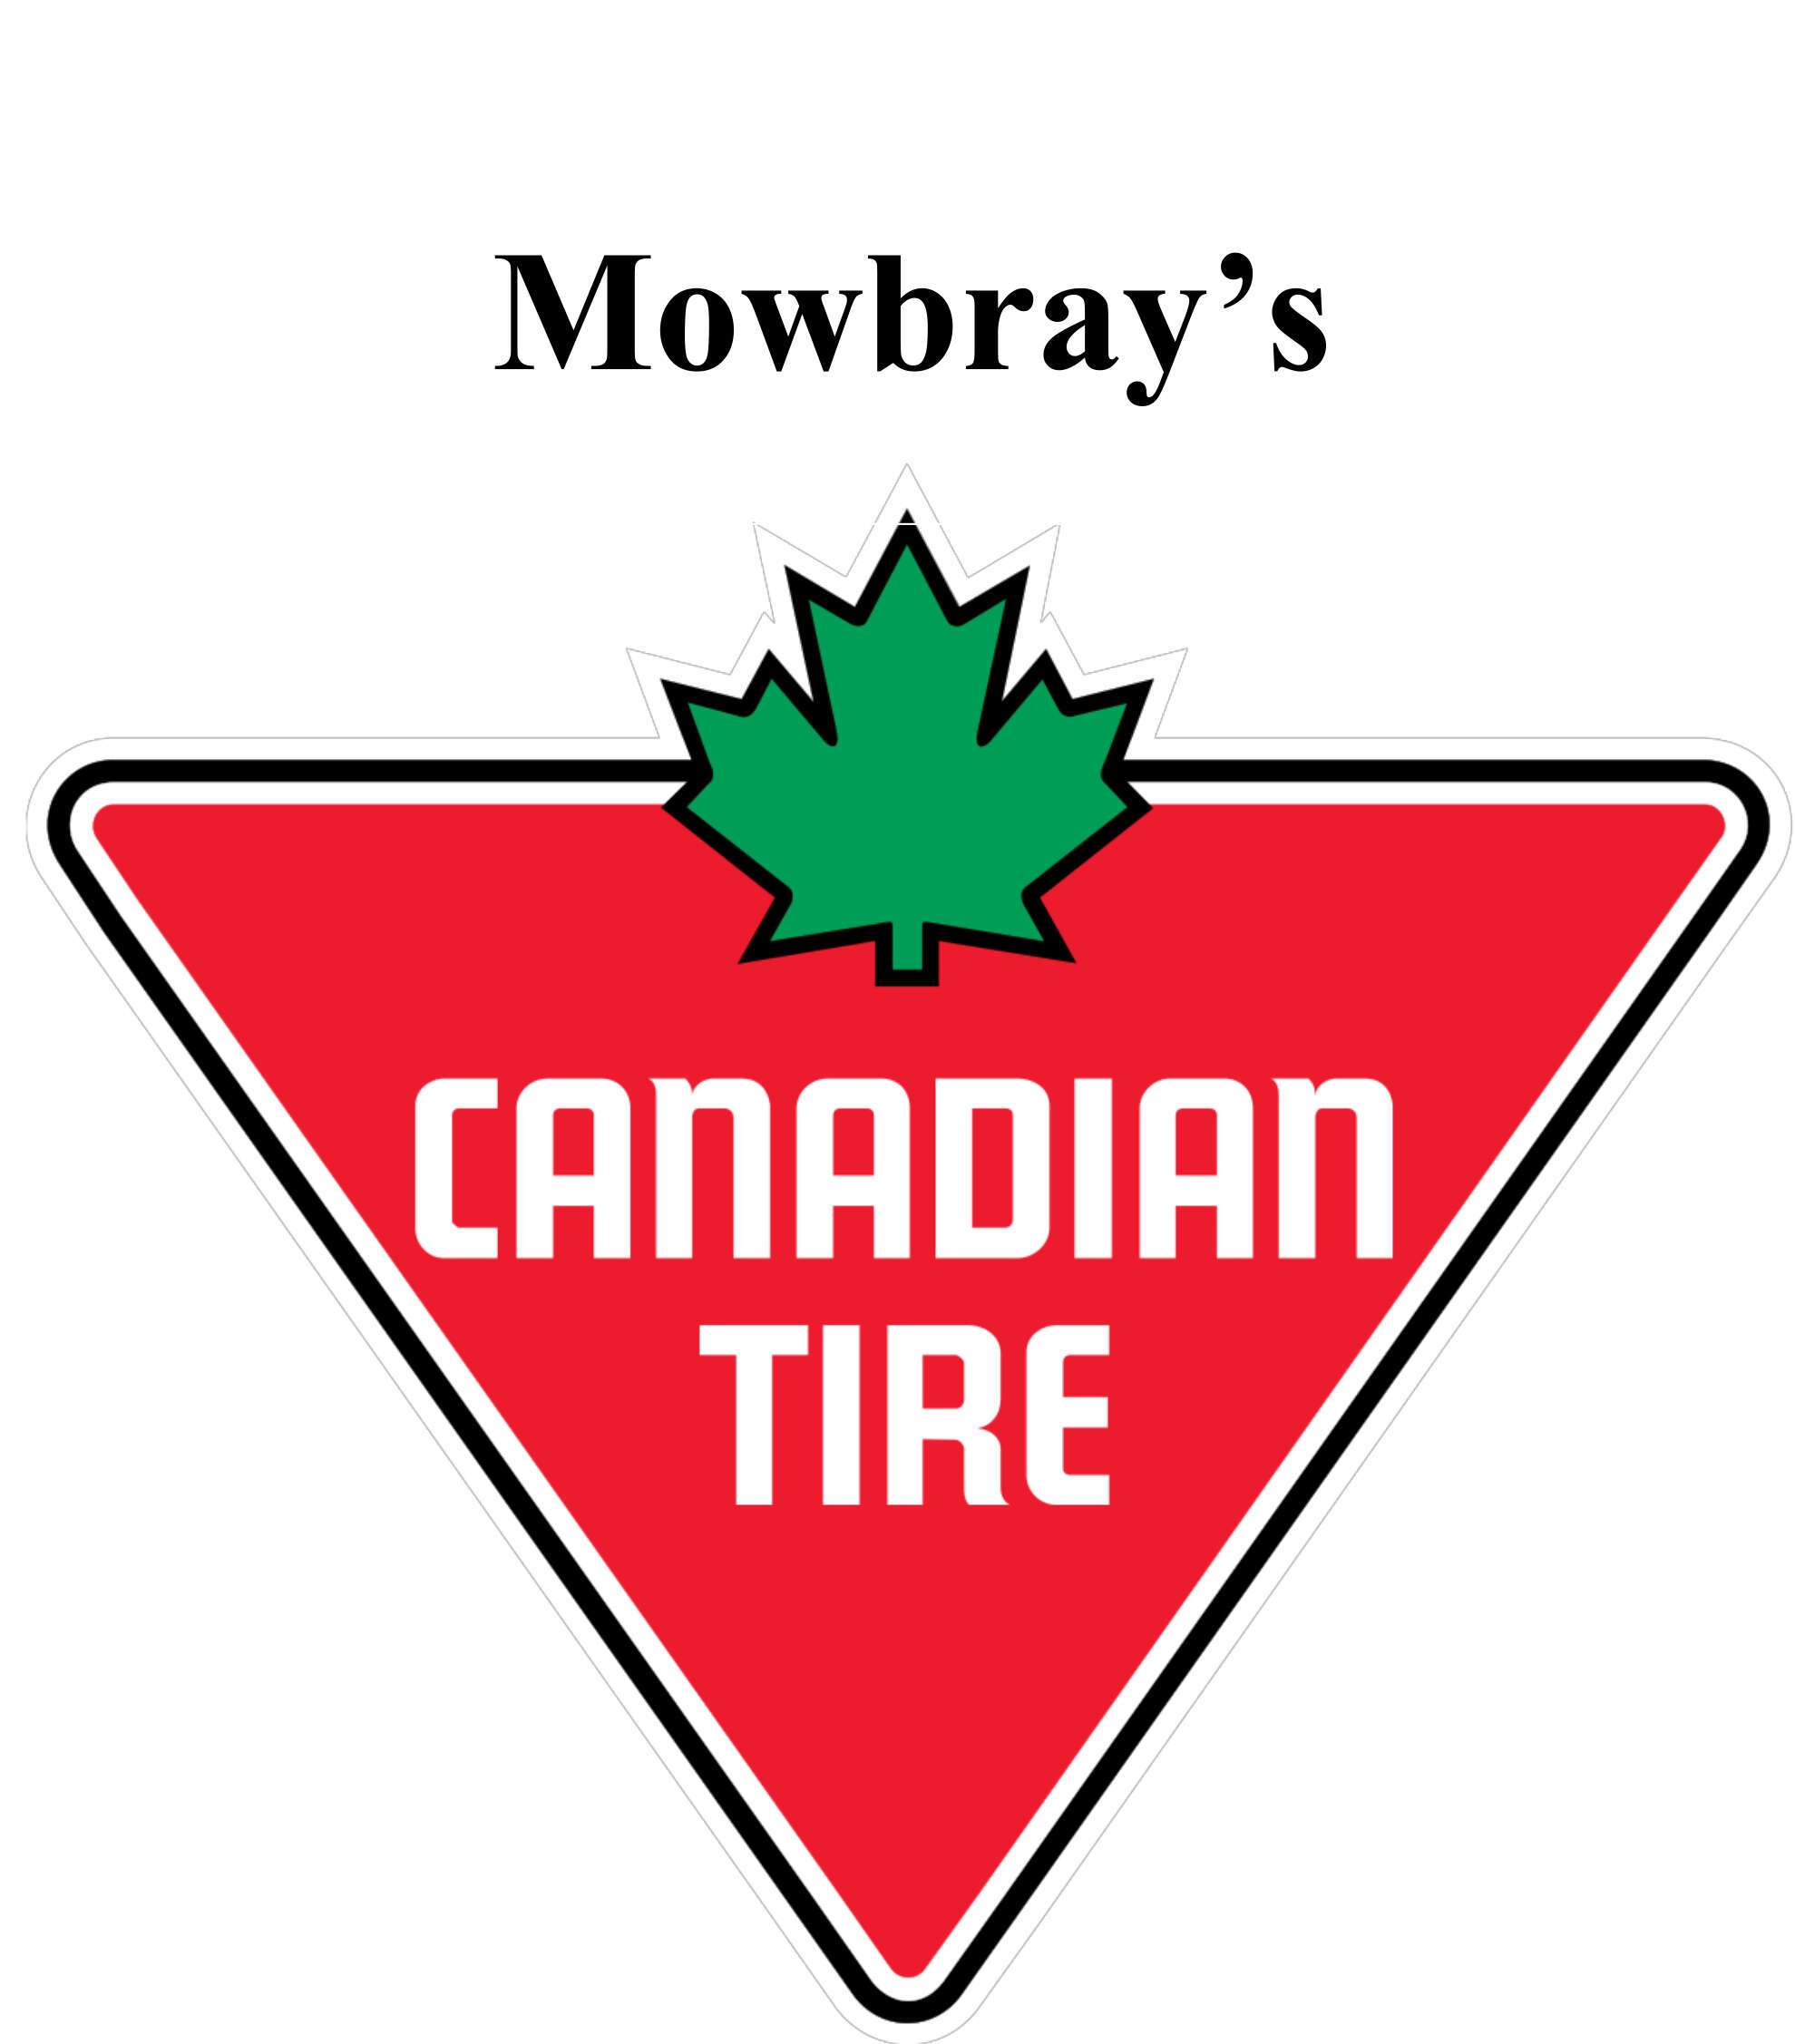 Mobray's Canadian Tire